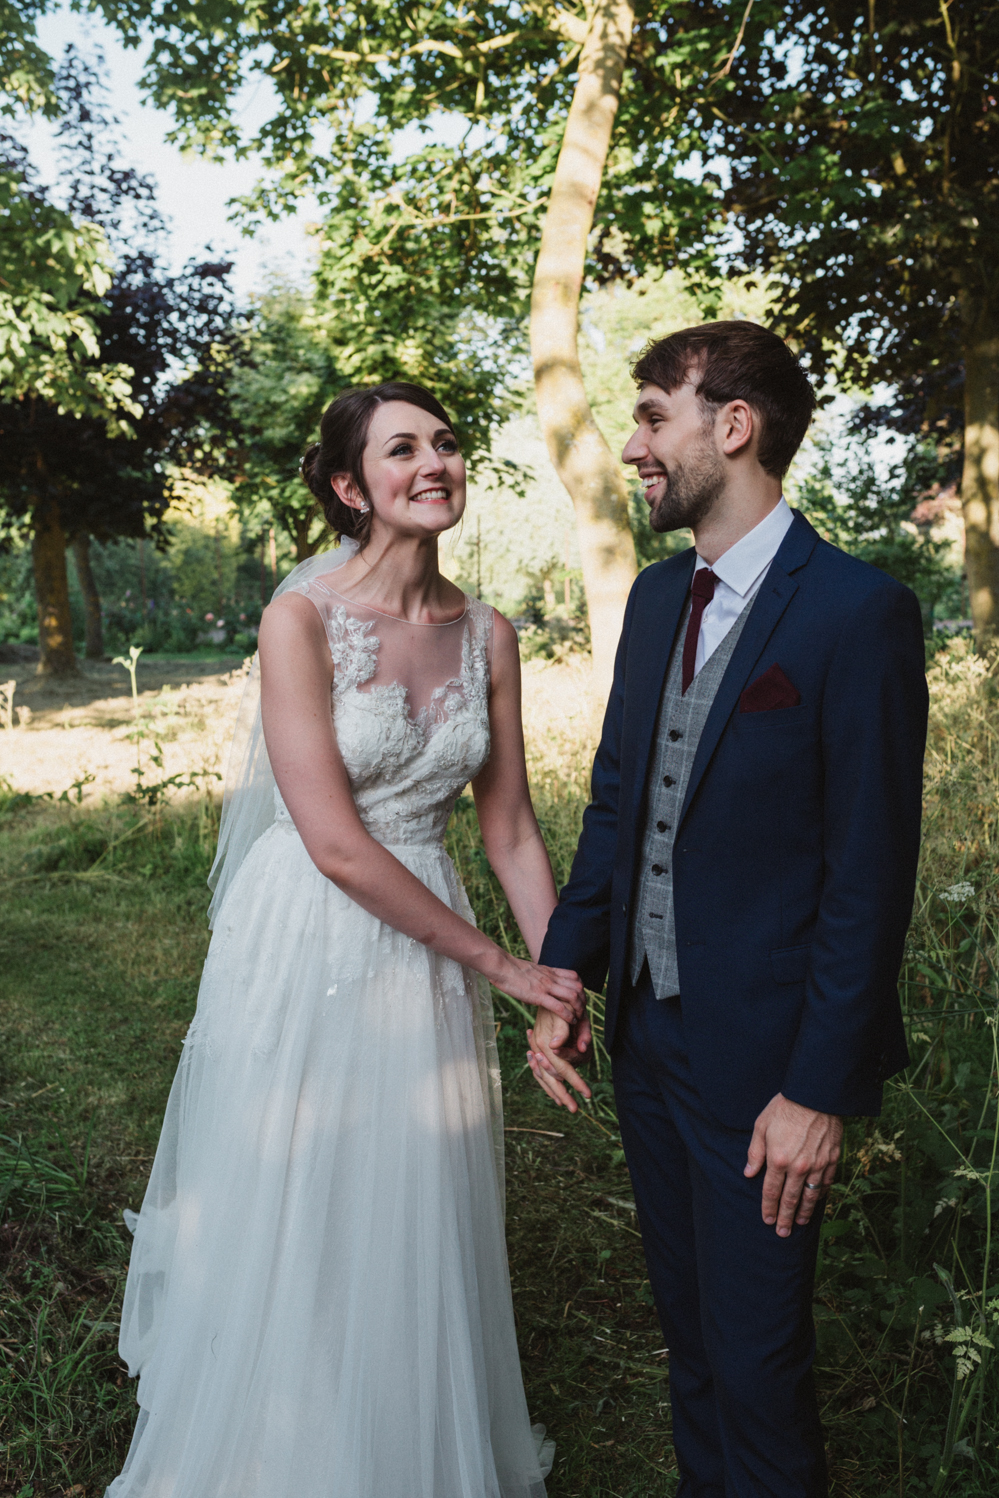 outdoor bridal portraits at elms barn wedding photography in suffolk